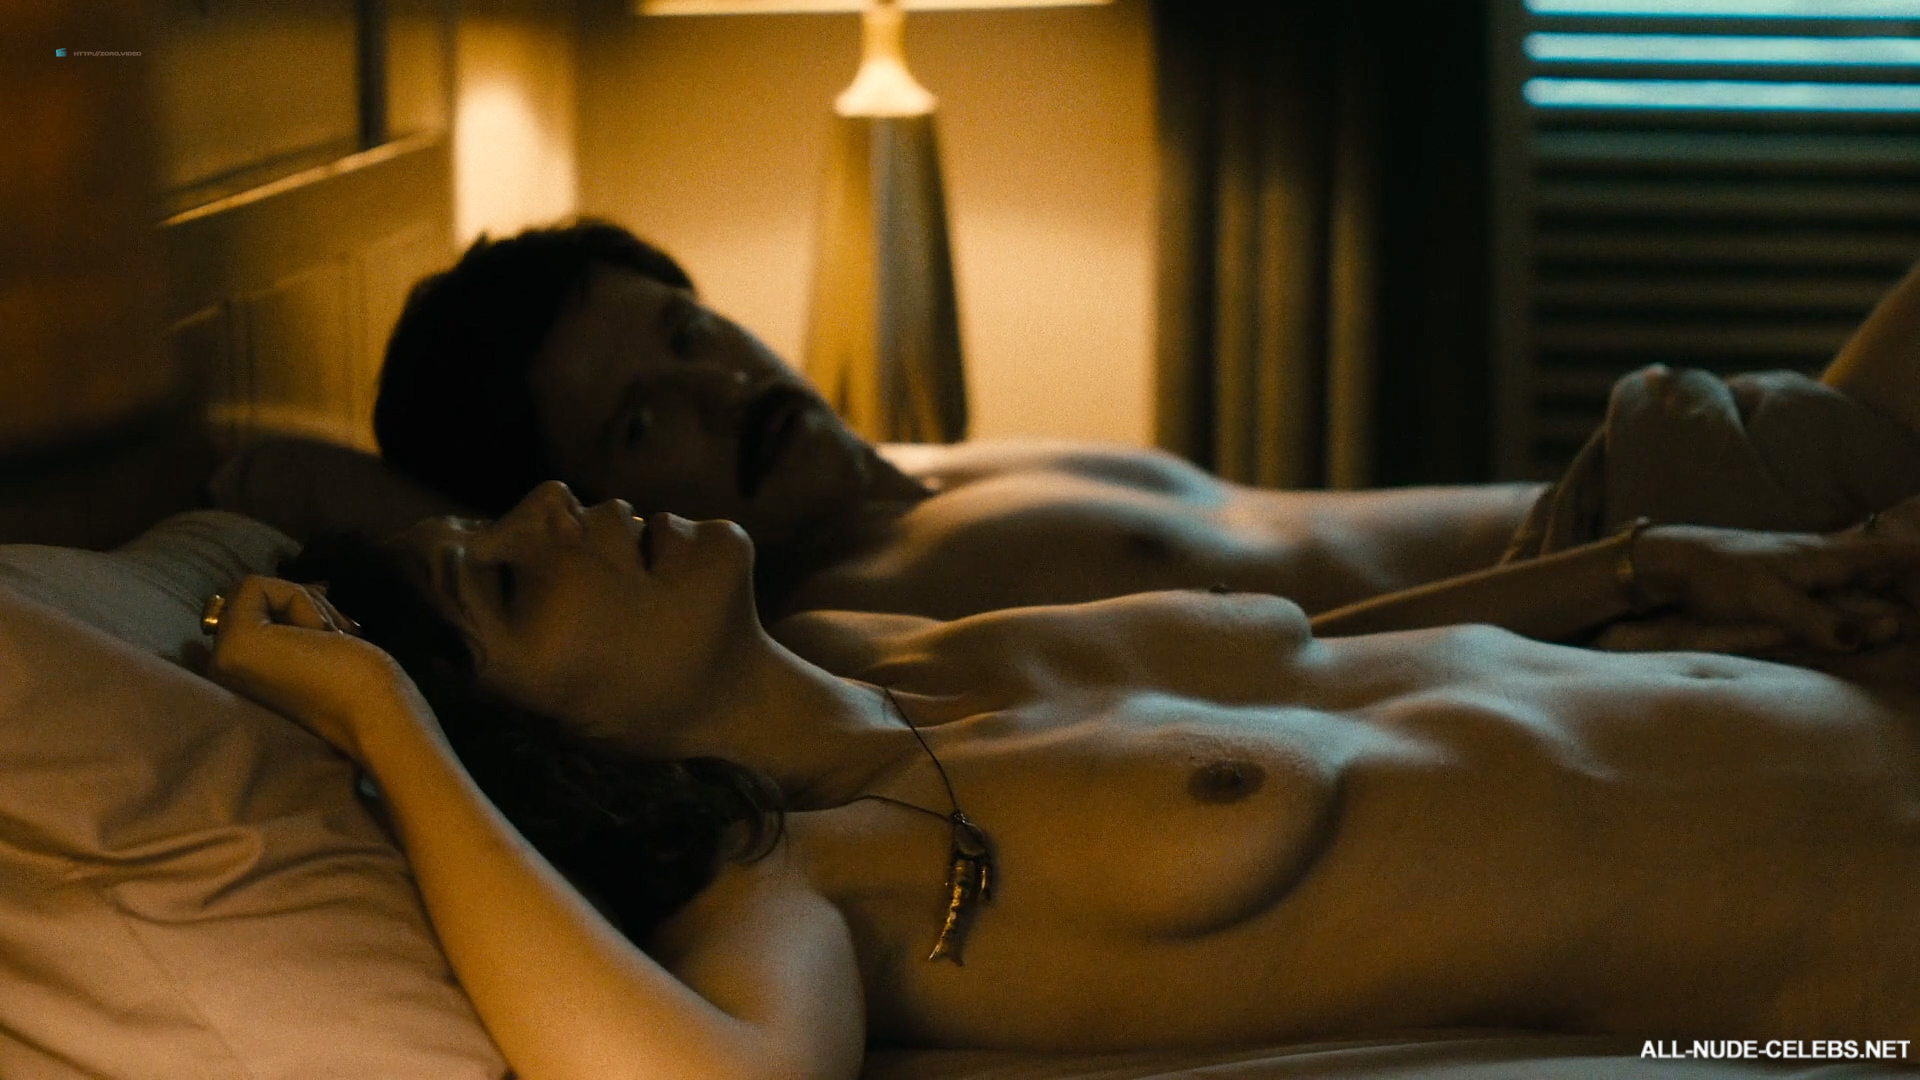 Maggie Gyllenhaal pussy and sex scenes.